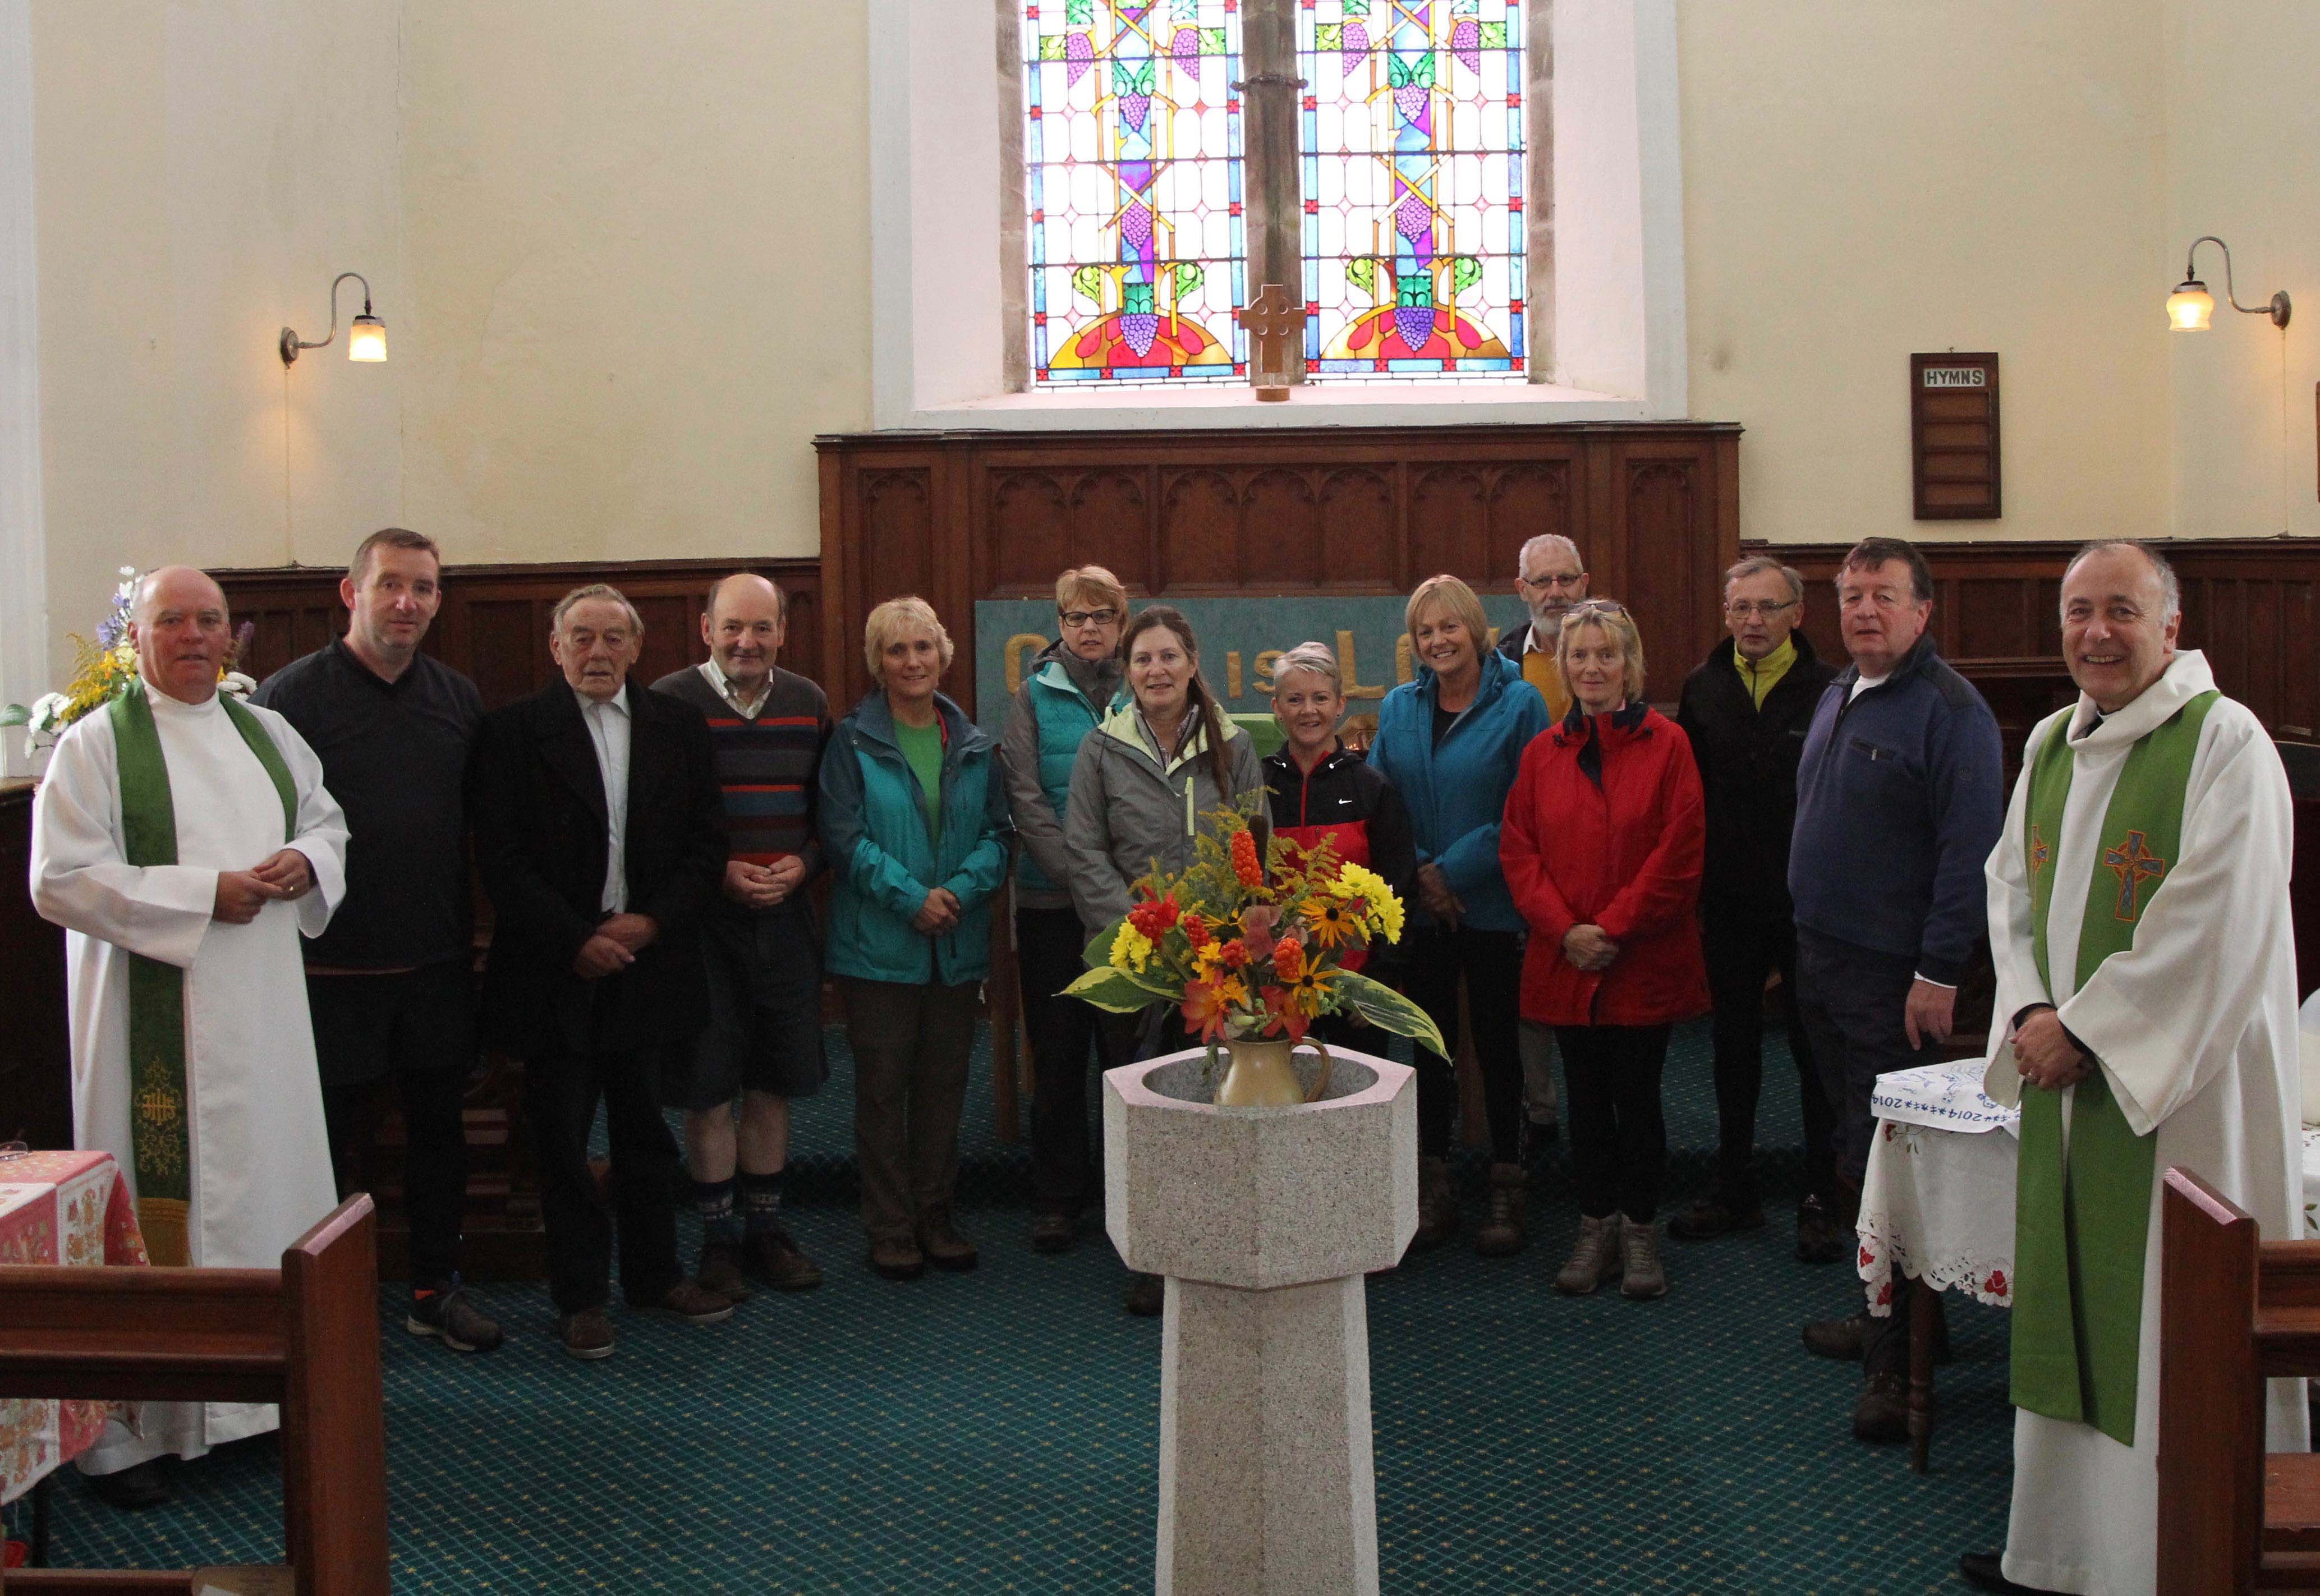 Participants in the Camino de Glendalough receiving their pilgrim blessing in St Kevin's Church, Hollywood.